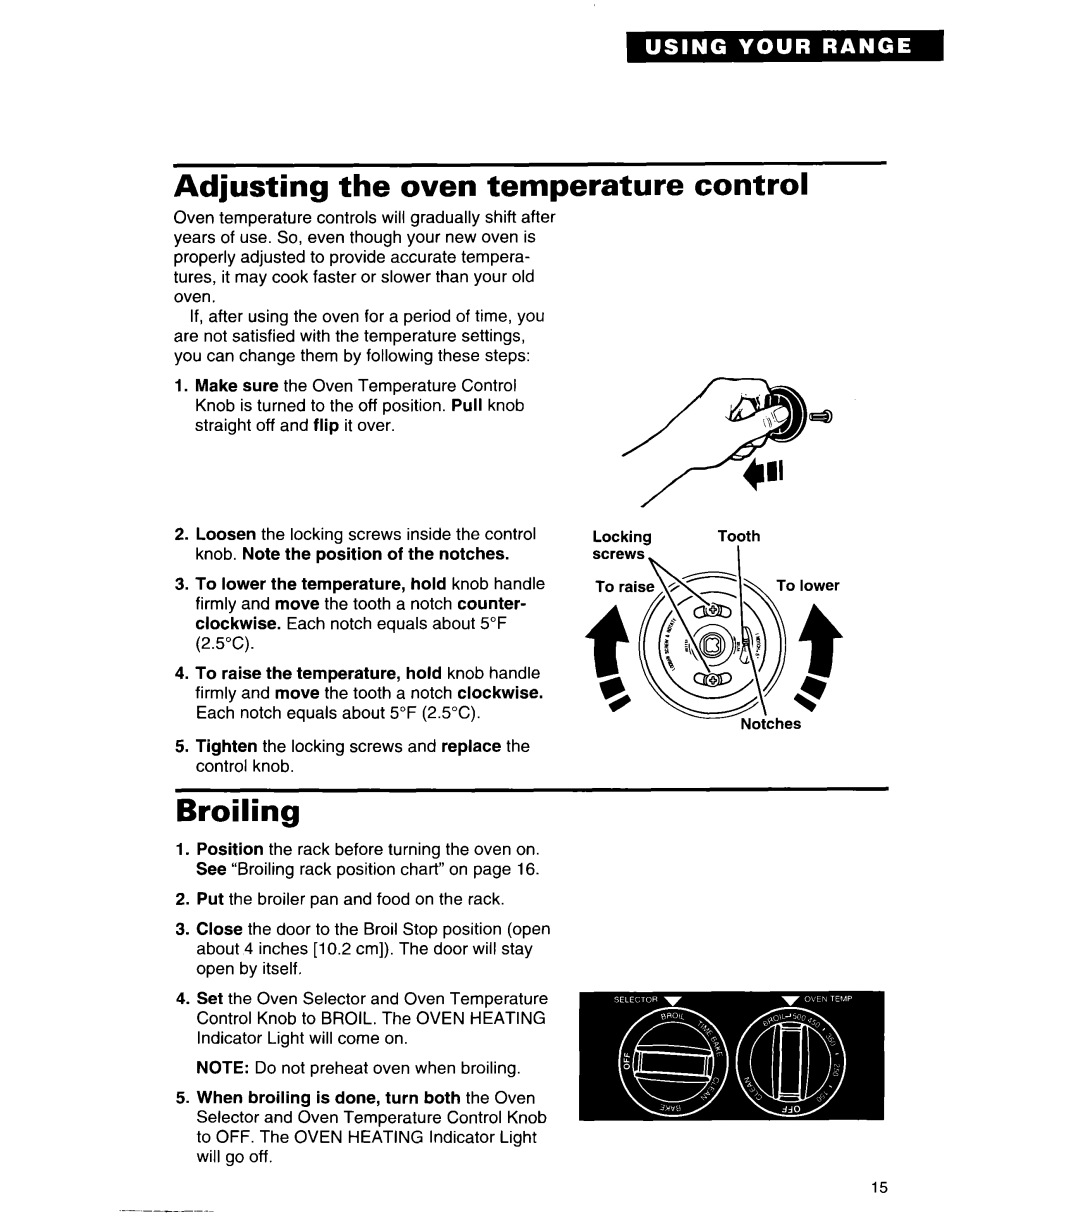 Whirlpool TER56W2B important safety instructions Adjusting the oven temperature, Broiling, control 